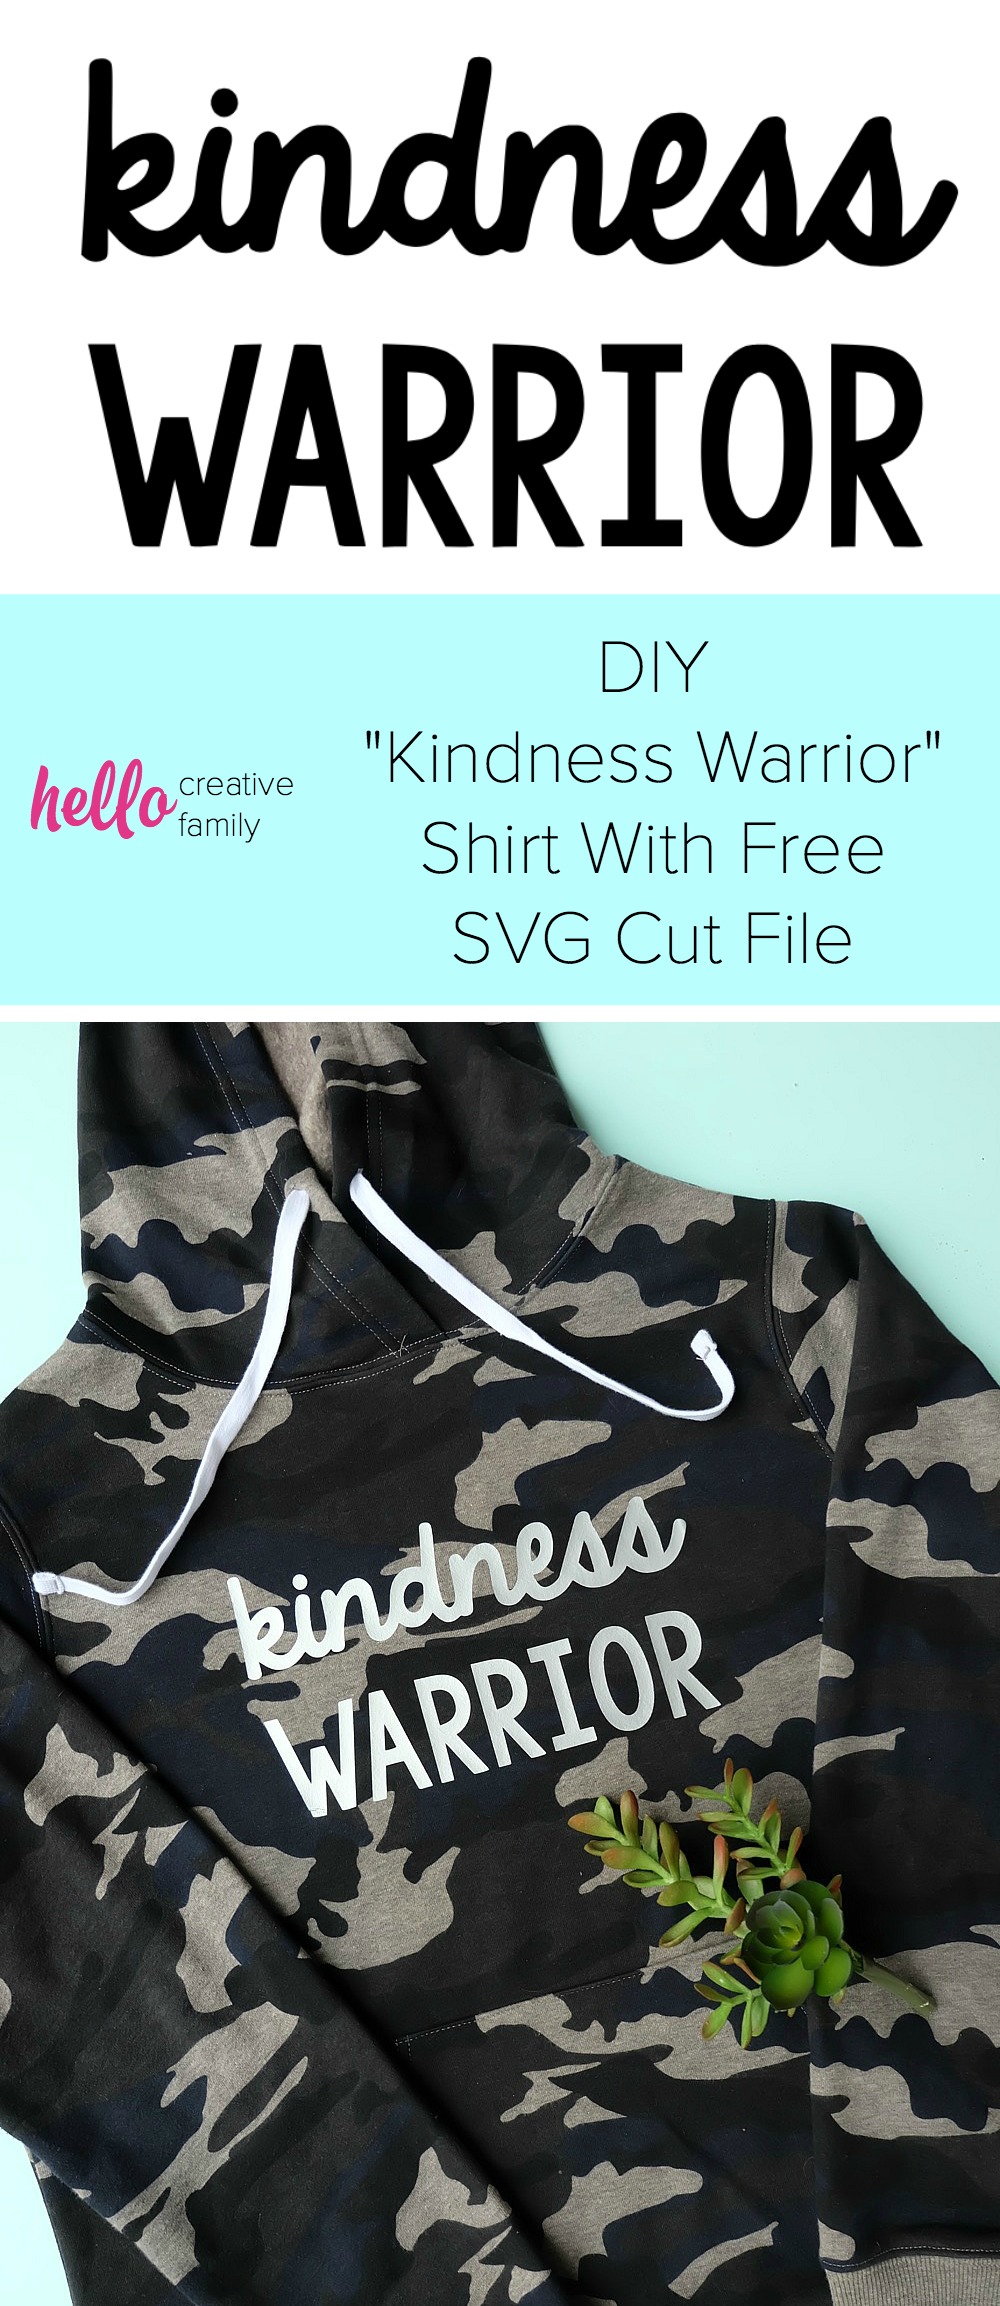 The world needs more kindness! Let's create an army of kindness with this easy to make DIY Kindness Warrior Shirt. Includes step by step instructions on how to make this project using a Cricut, along with a free SVG cut file compatible with Cricut or Silhouette. The perfect hoodie for kids or adults to spread love instead of hate, discourage bullying and make the world a better place. #DIY #Cricut #Silhouette #SVG #CricutMade